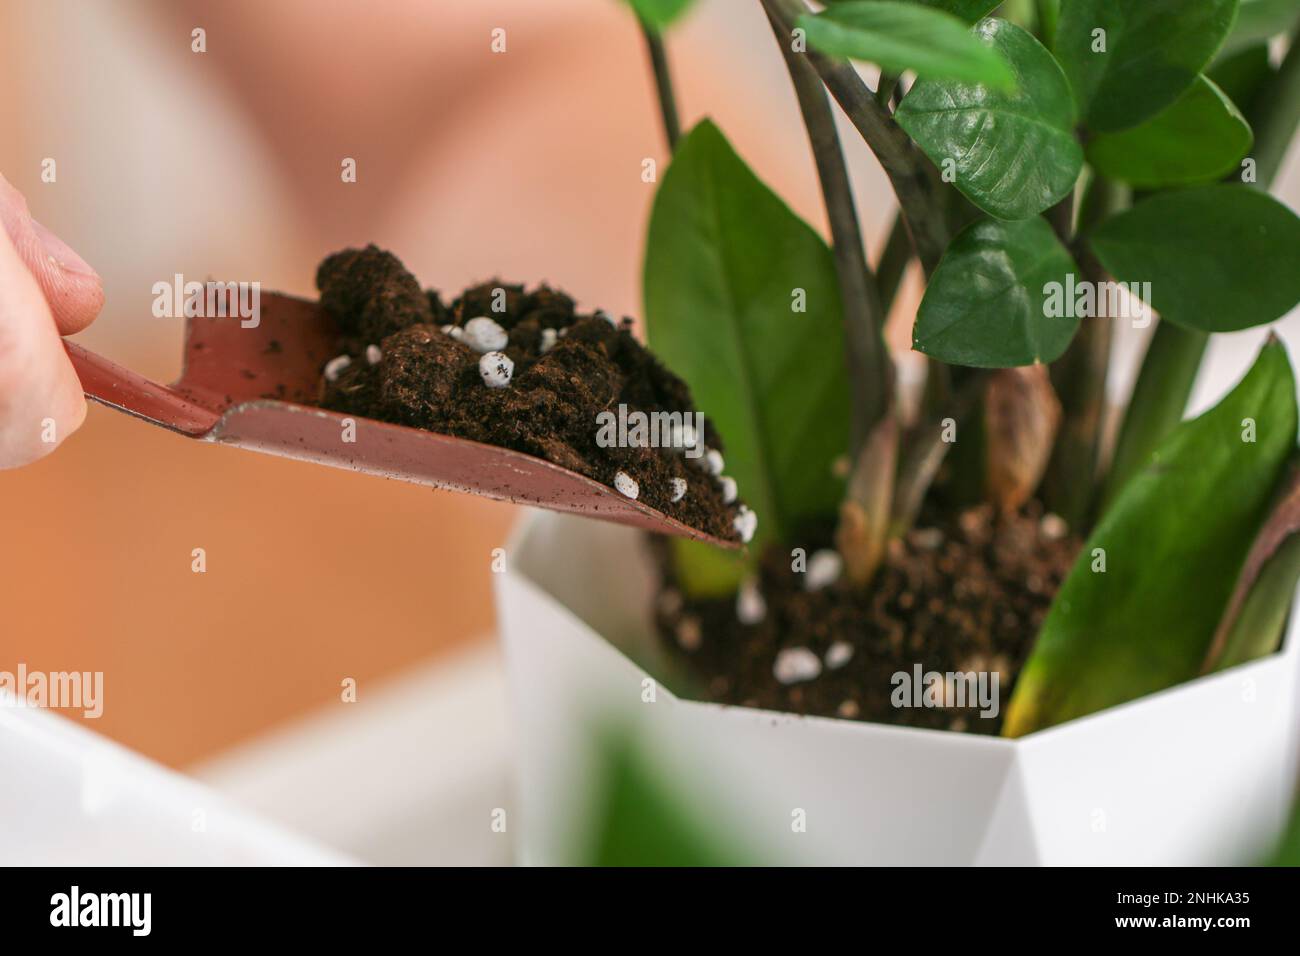 Transplanting zamiokulkas from a small pot to a large one. A man puts soil in a new pot with a home plant. Spring gardening. Stock Photo